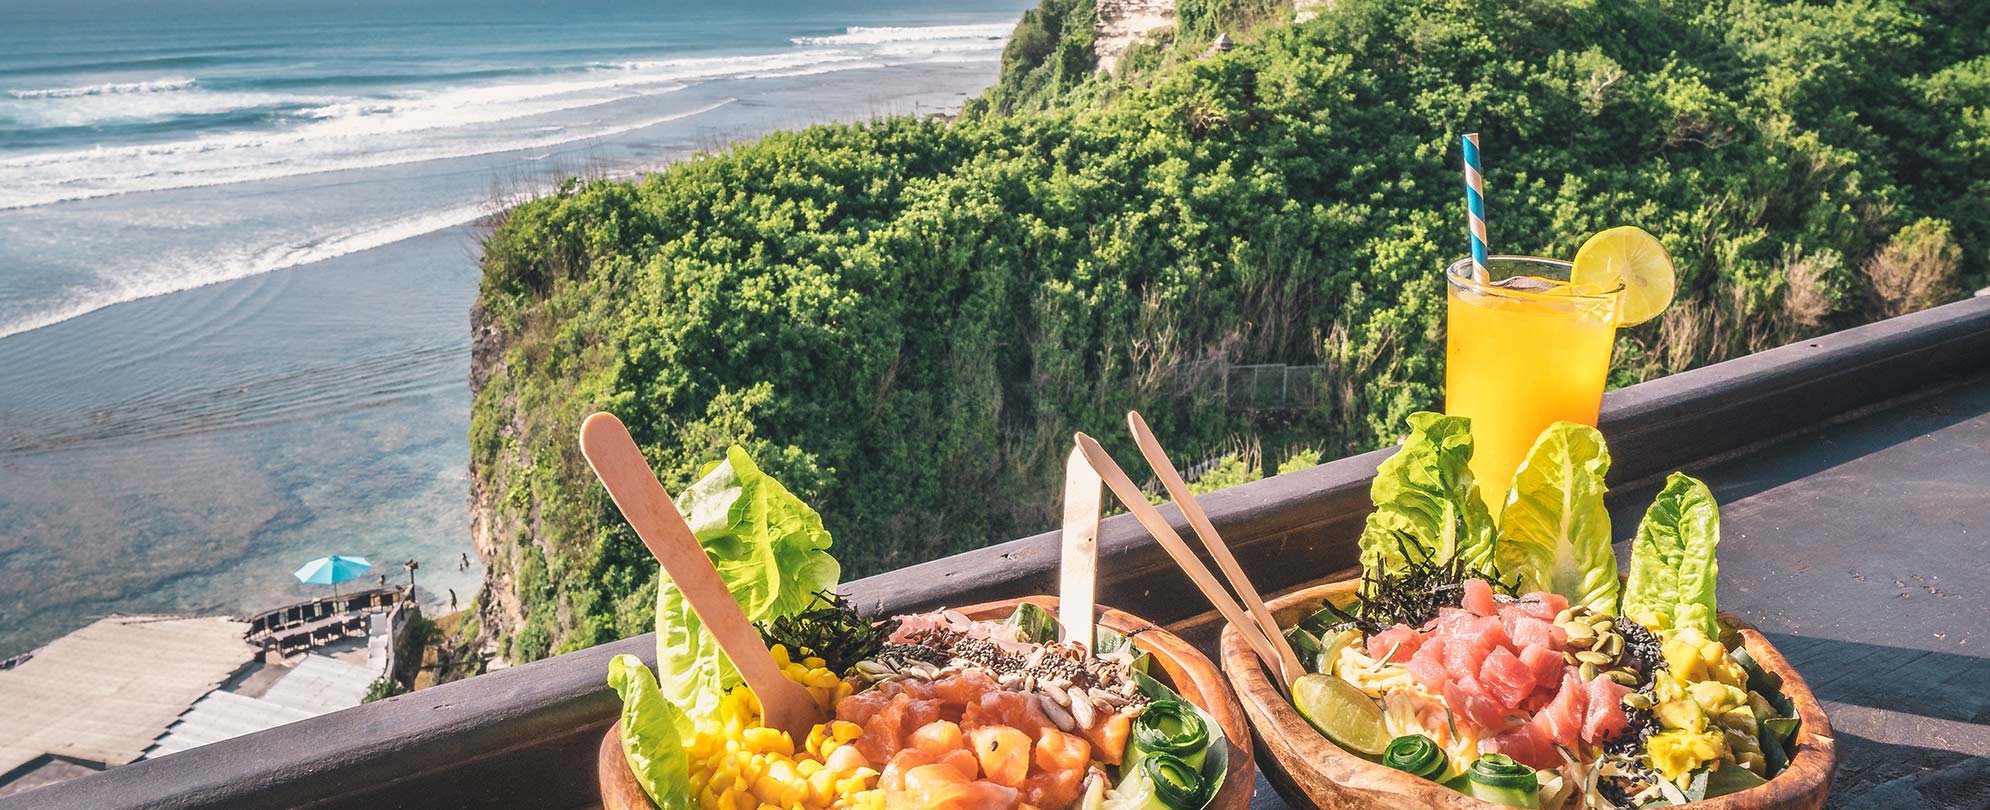 Poke bowls and a fruit drink on a bar overlooking the ocean in Baja, Mexico.